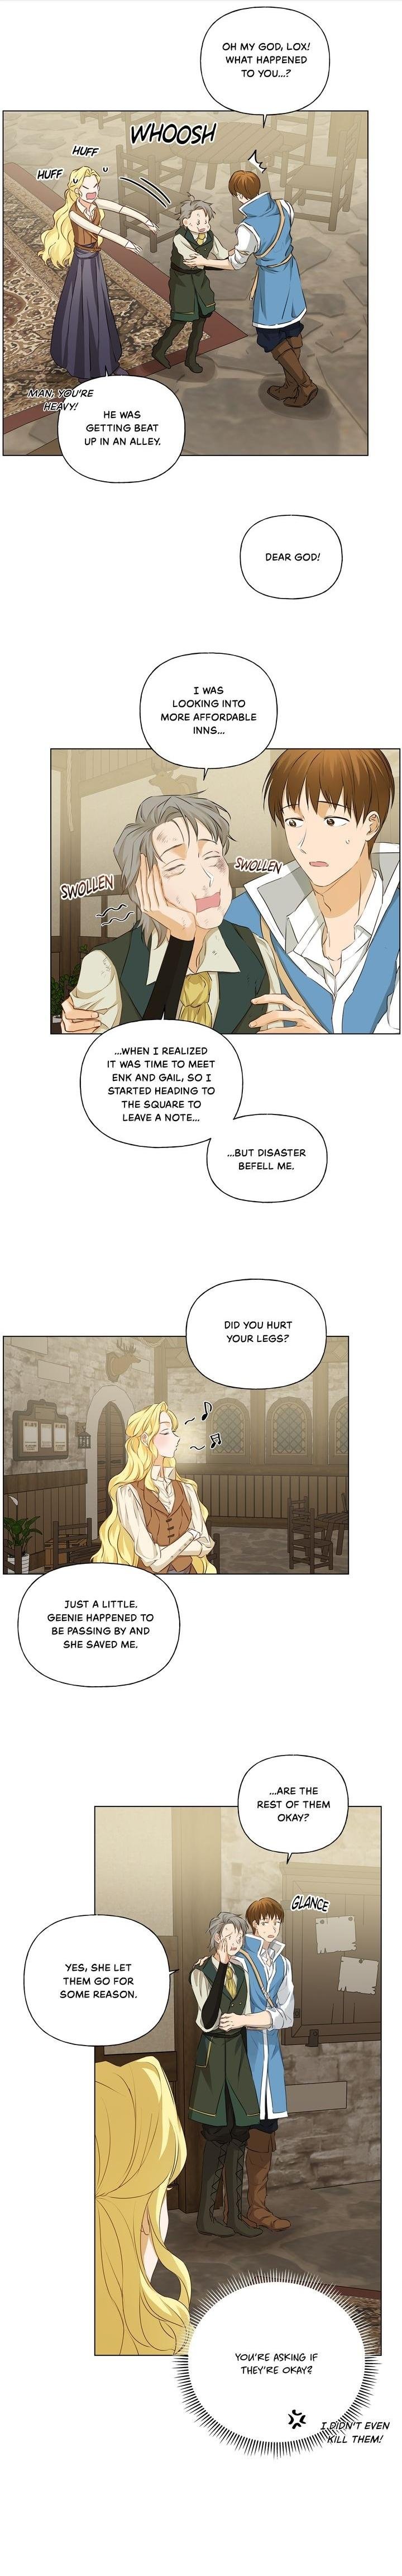 the-golden-haired-elementalist-chap-78-1